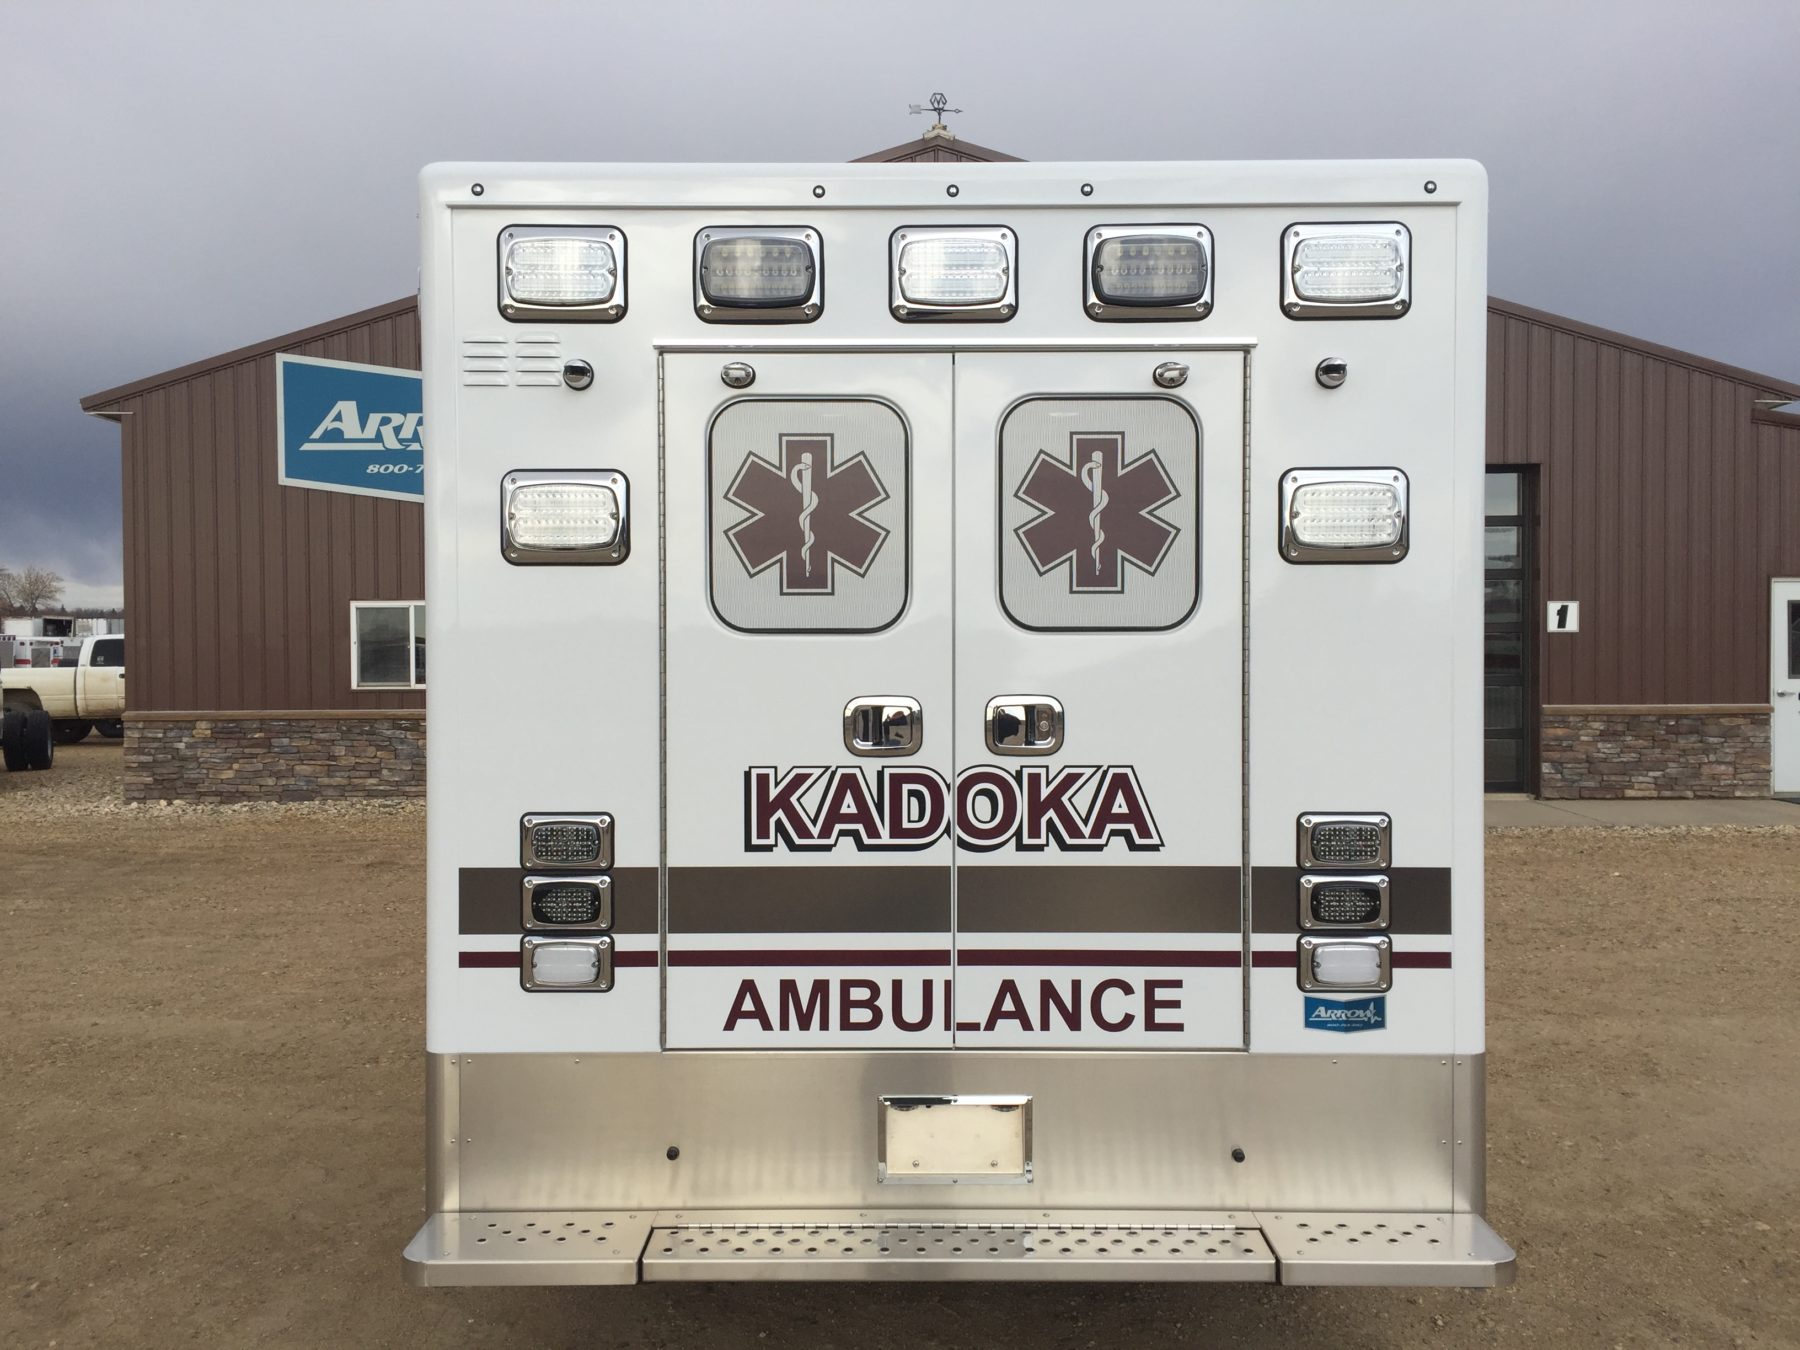 2018 Ram 4500 4x4 Heavy Duty Ambulance For Sale – Picture 8